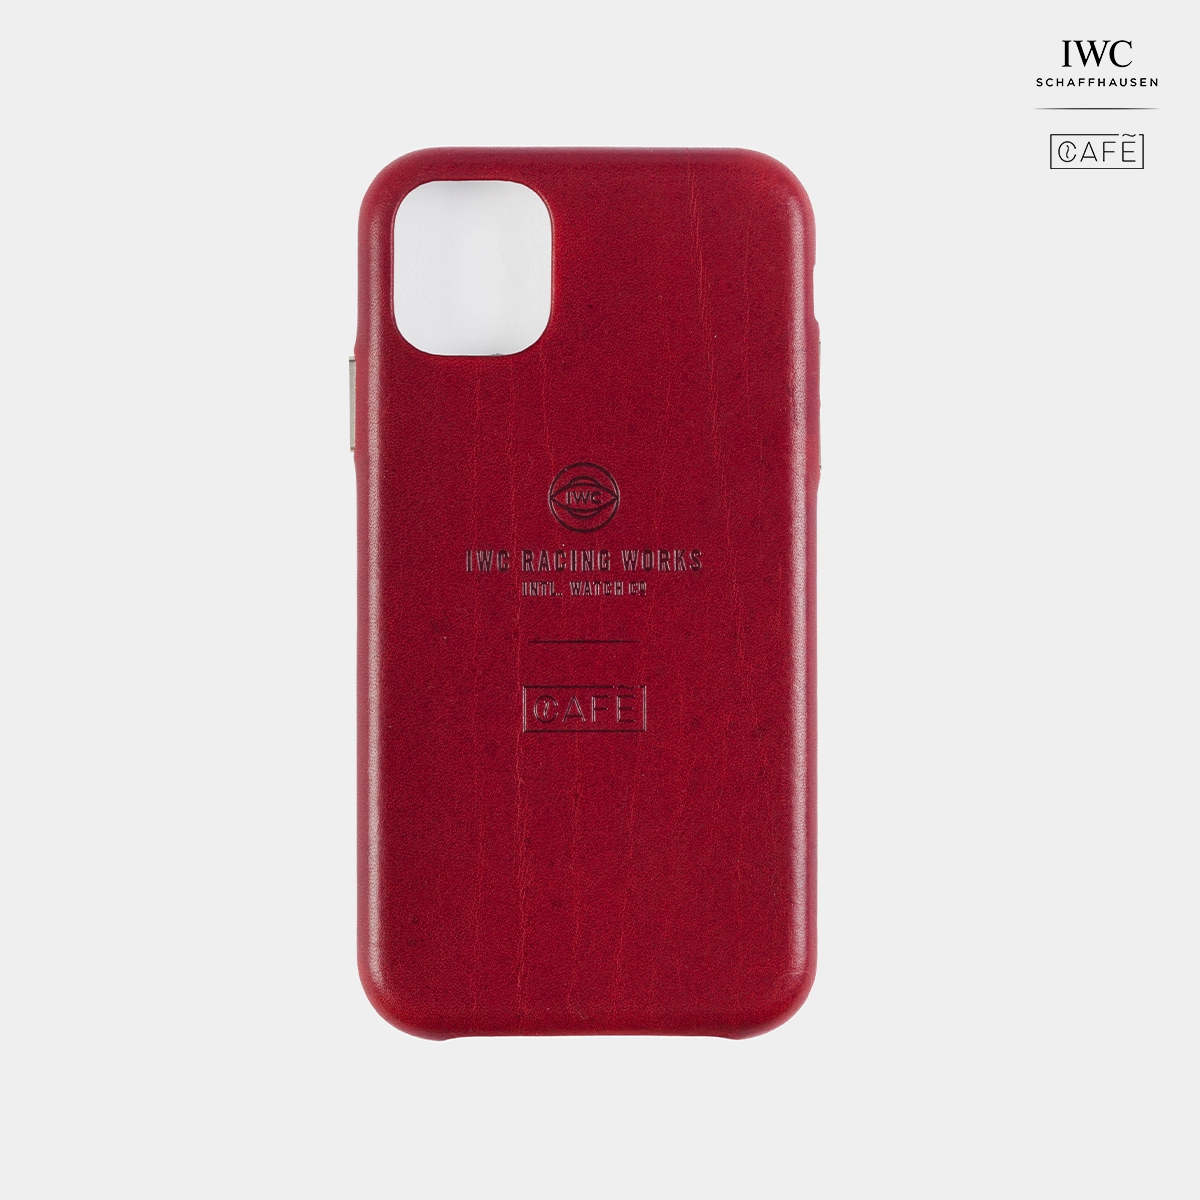 iwc iphone case red